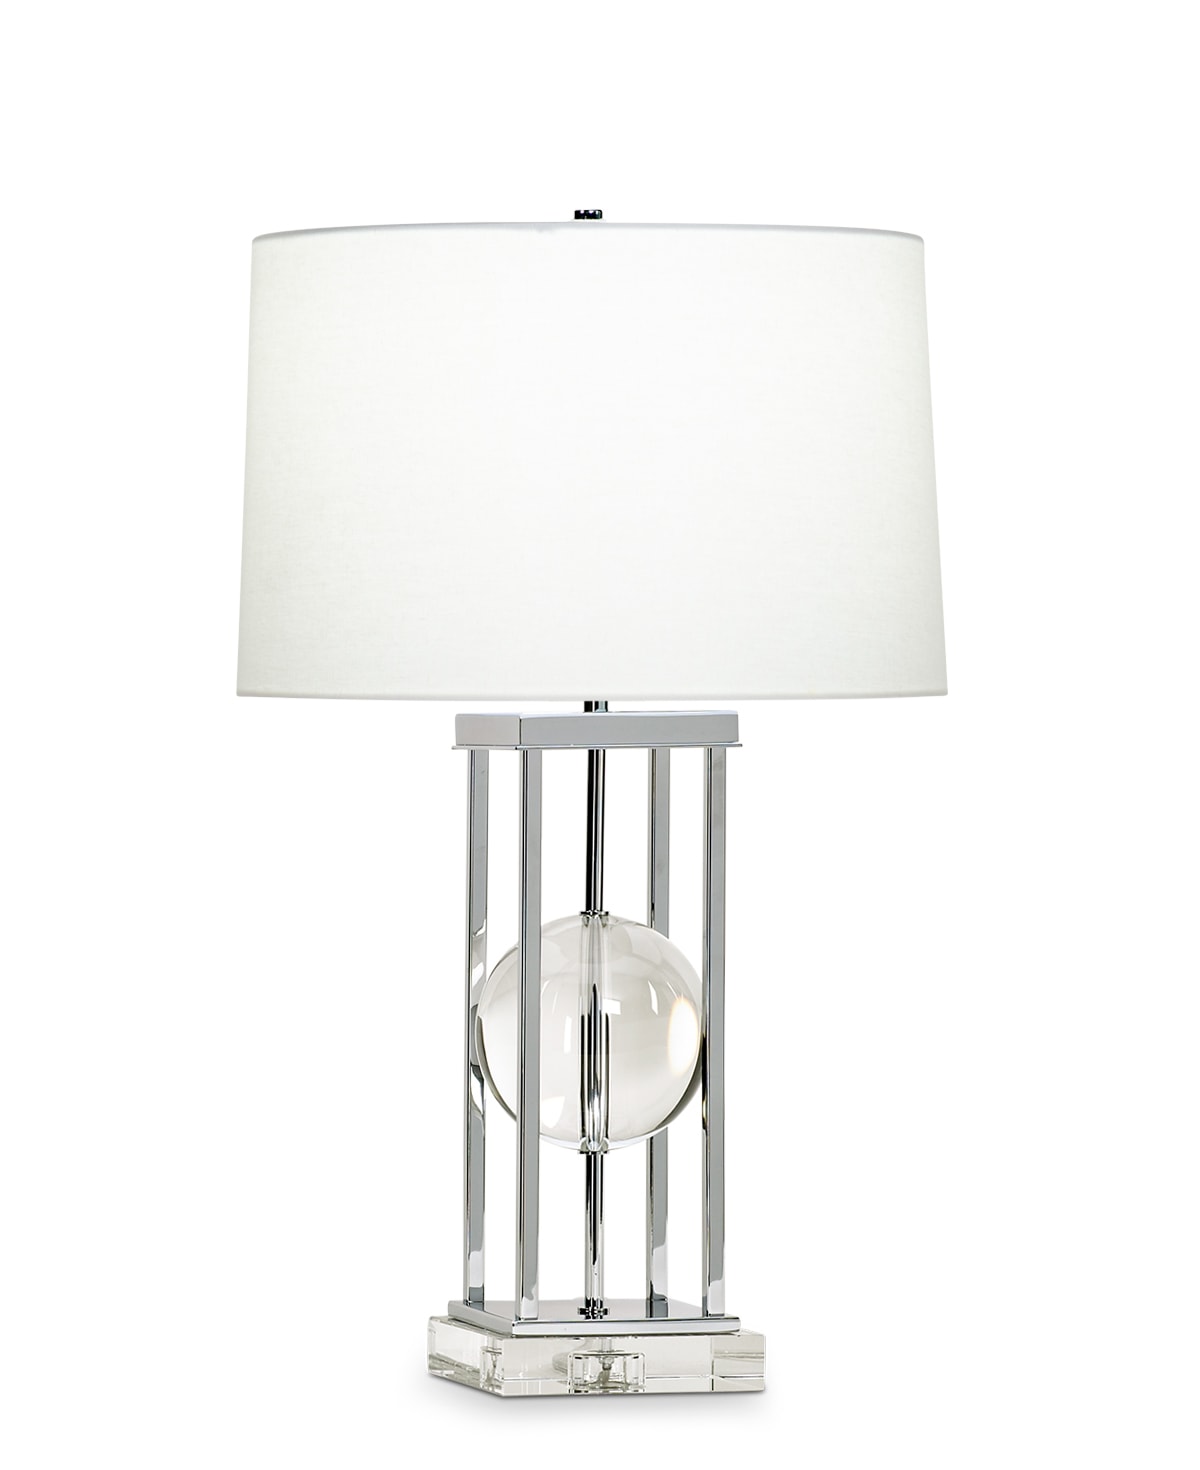 FlowDecor Locust Table Lamp in crystal and metal with chrome finish and off-white linen tapered drum shade (# 3700)